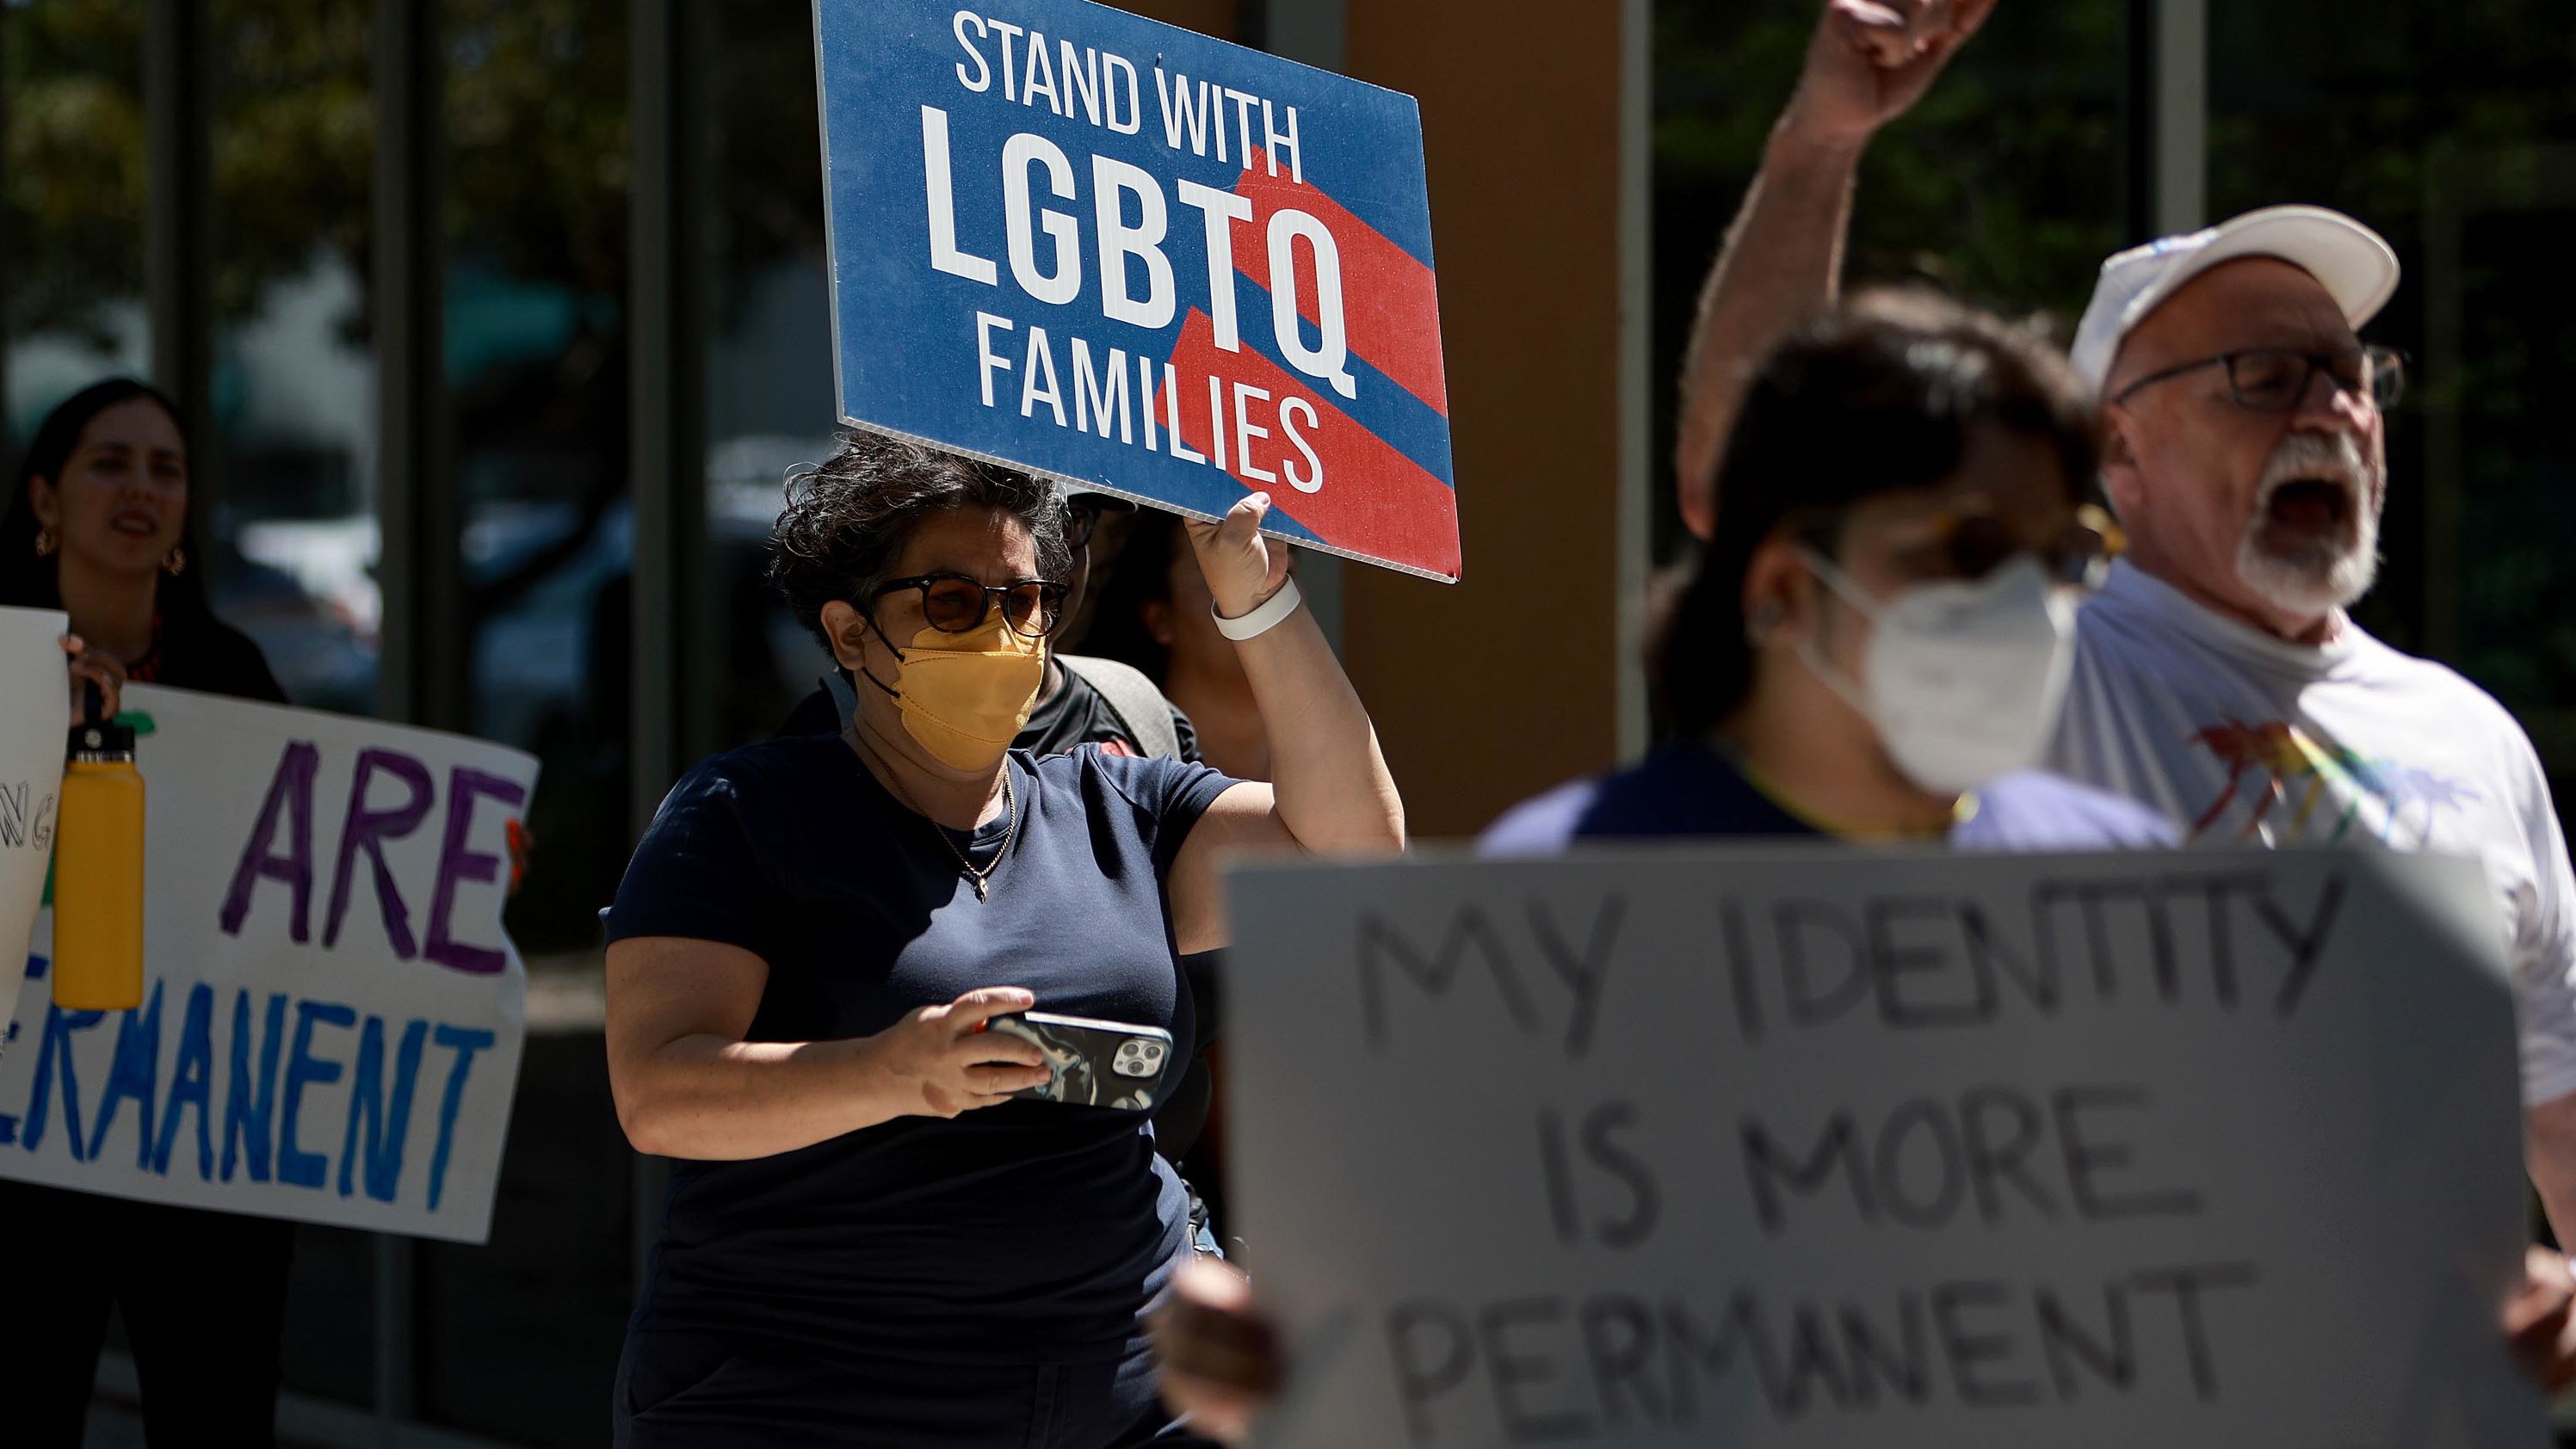 People protest in front of Florida State Senator Ileana Garcia's office after the passage of the Parental Rights in Education bill, dubbed the "Don't Say Gay" bill by LGBTQ activists, on March 09, 2022, in Miami, Florida.